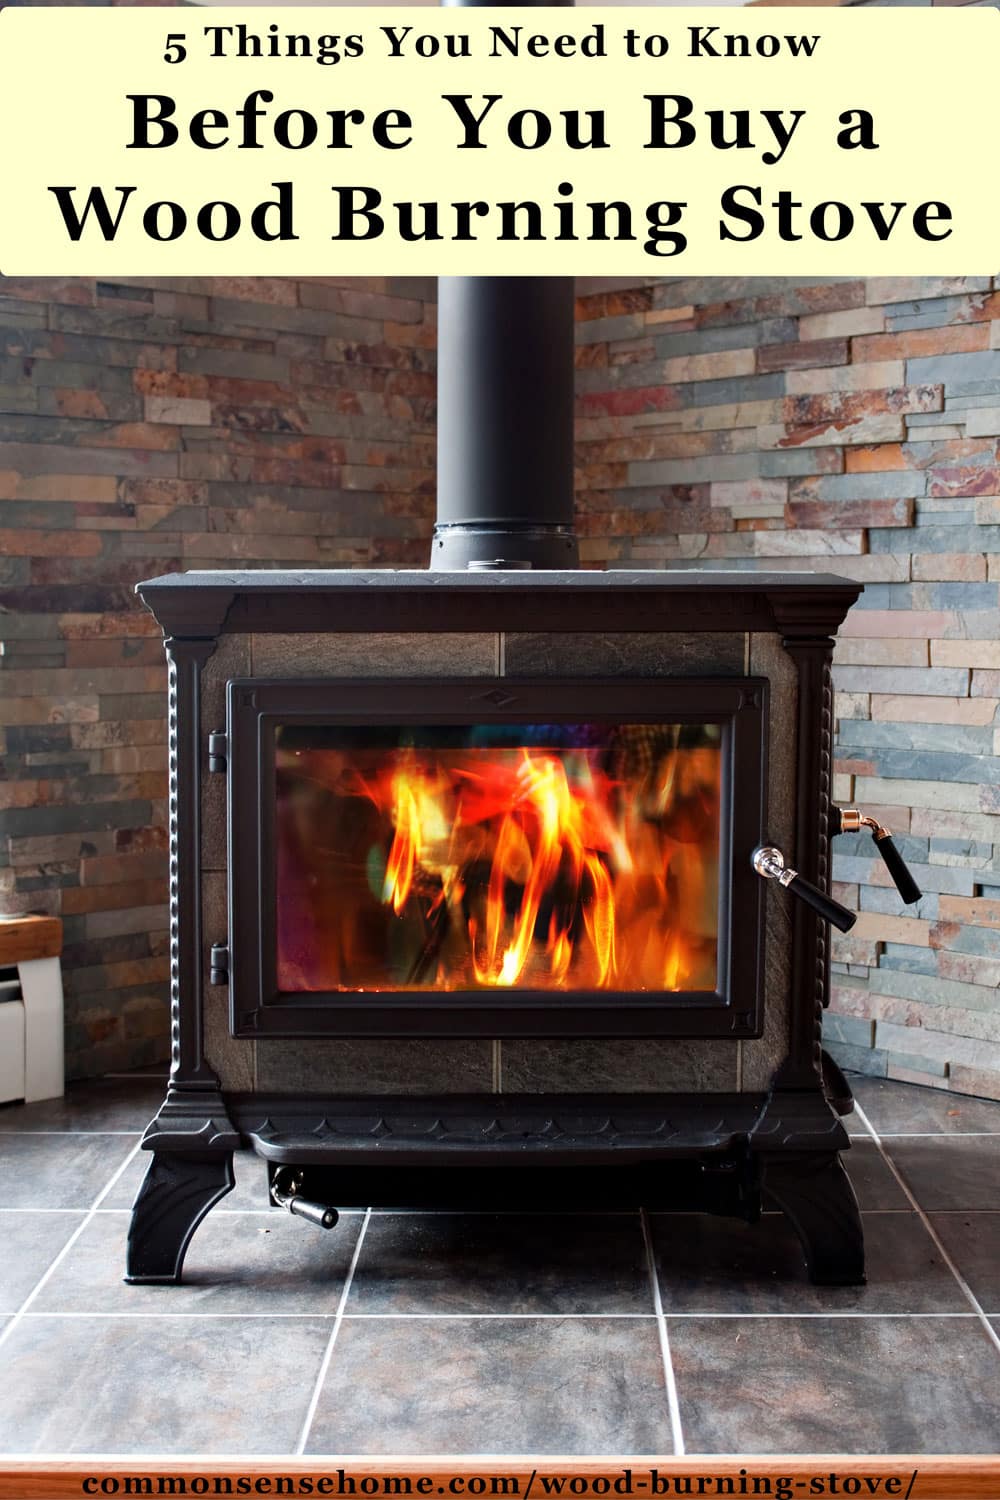 Wood Burning Stove, Chimney Fire Outdoor Boiler